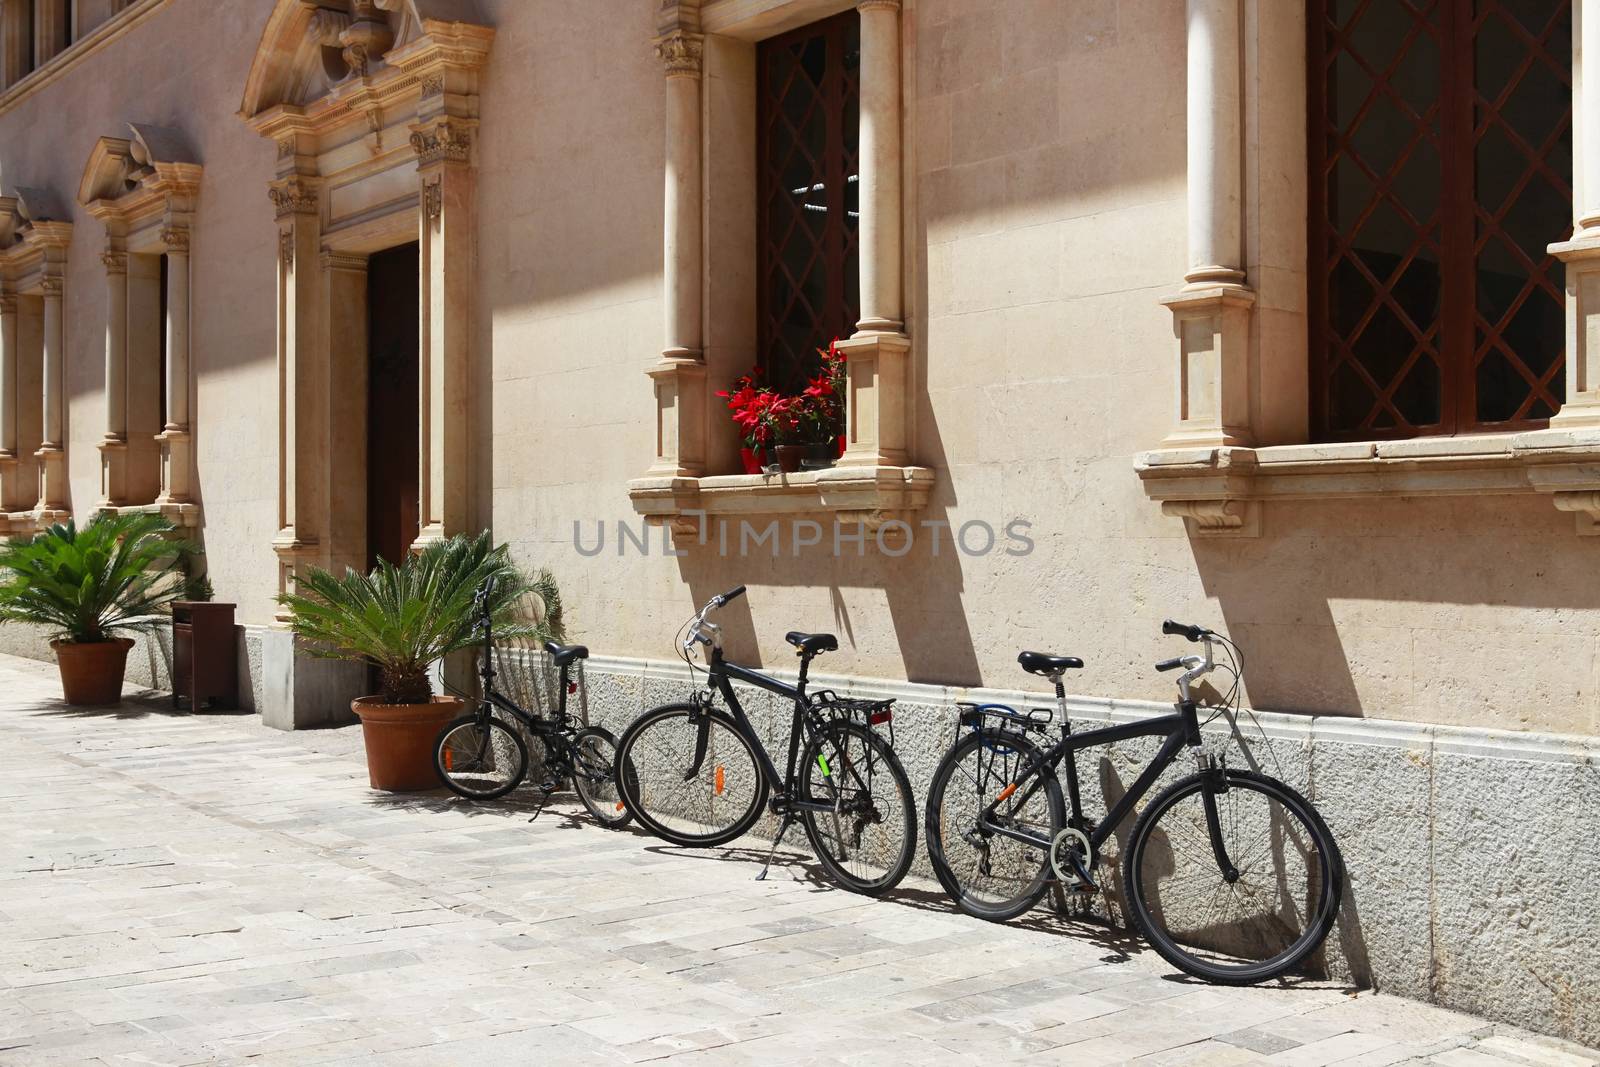 Parked bicycles near a beautiful building in Alcudia, Spain